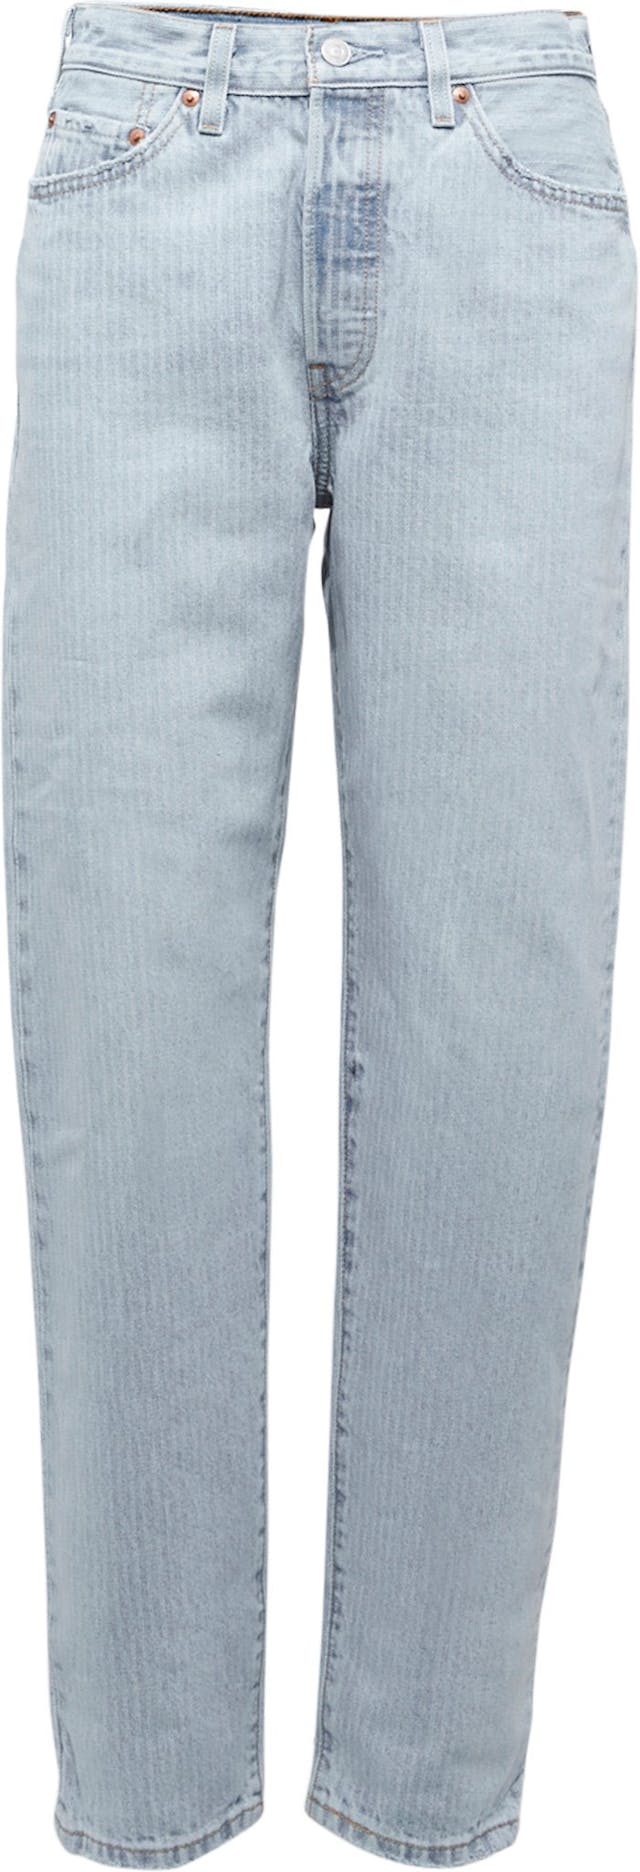 Product image for 501 ‘81 Jeans - Women's